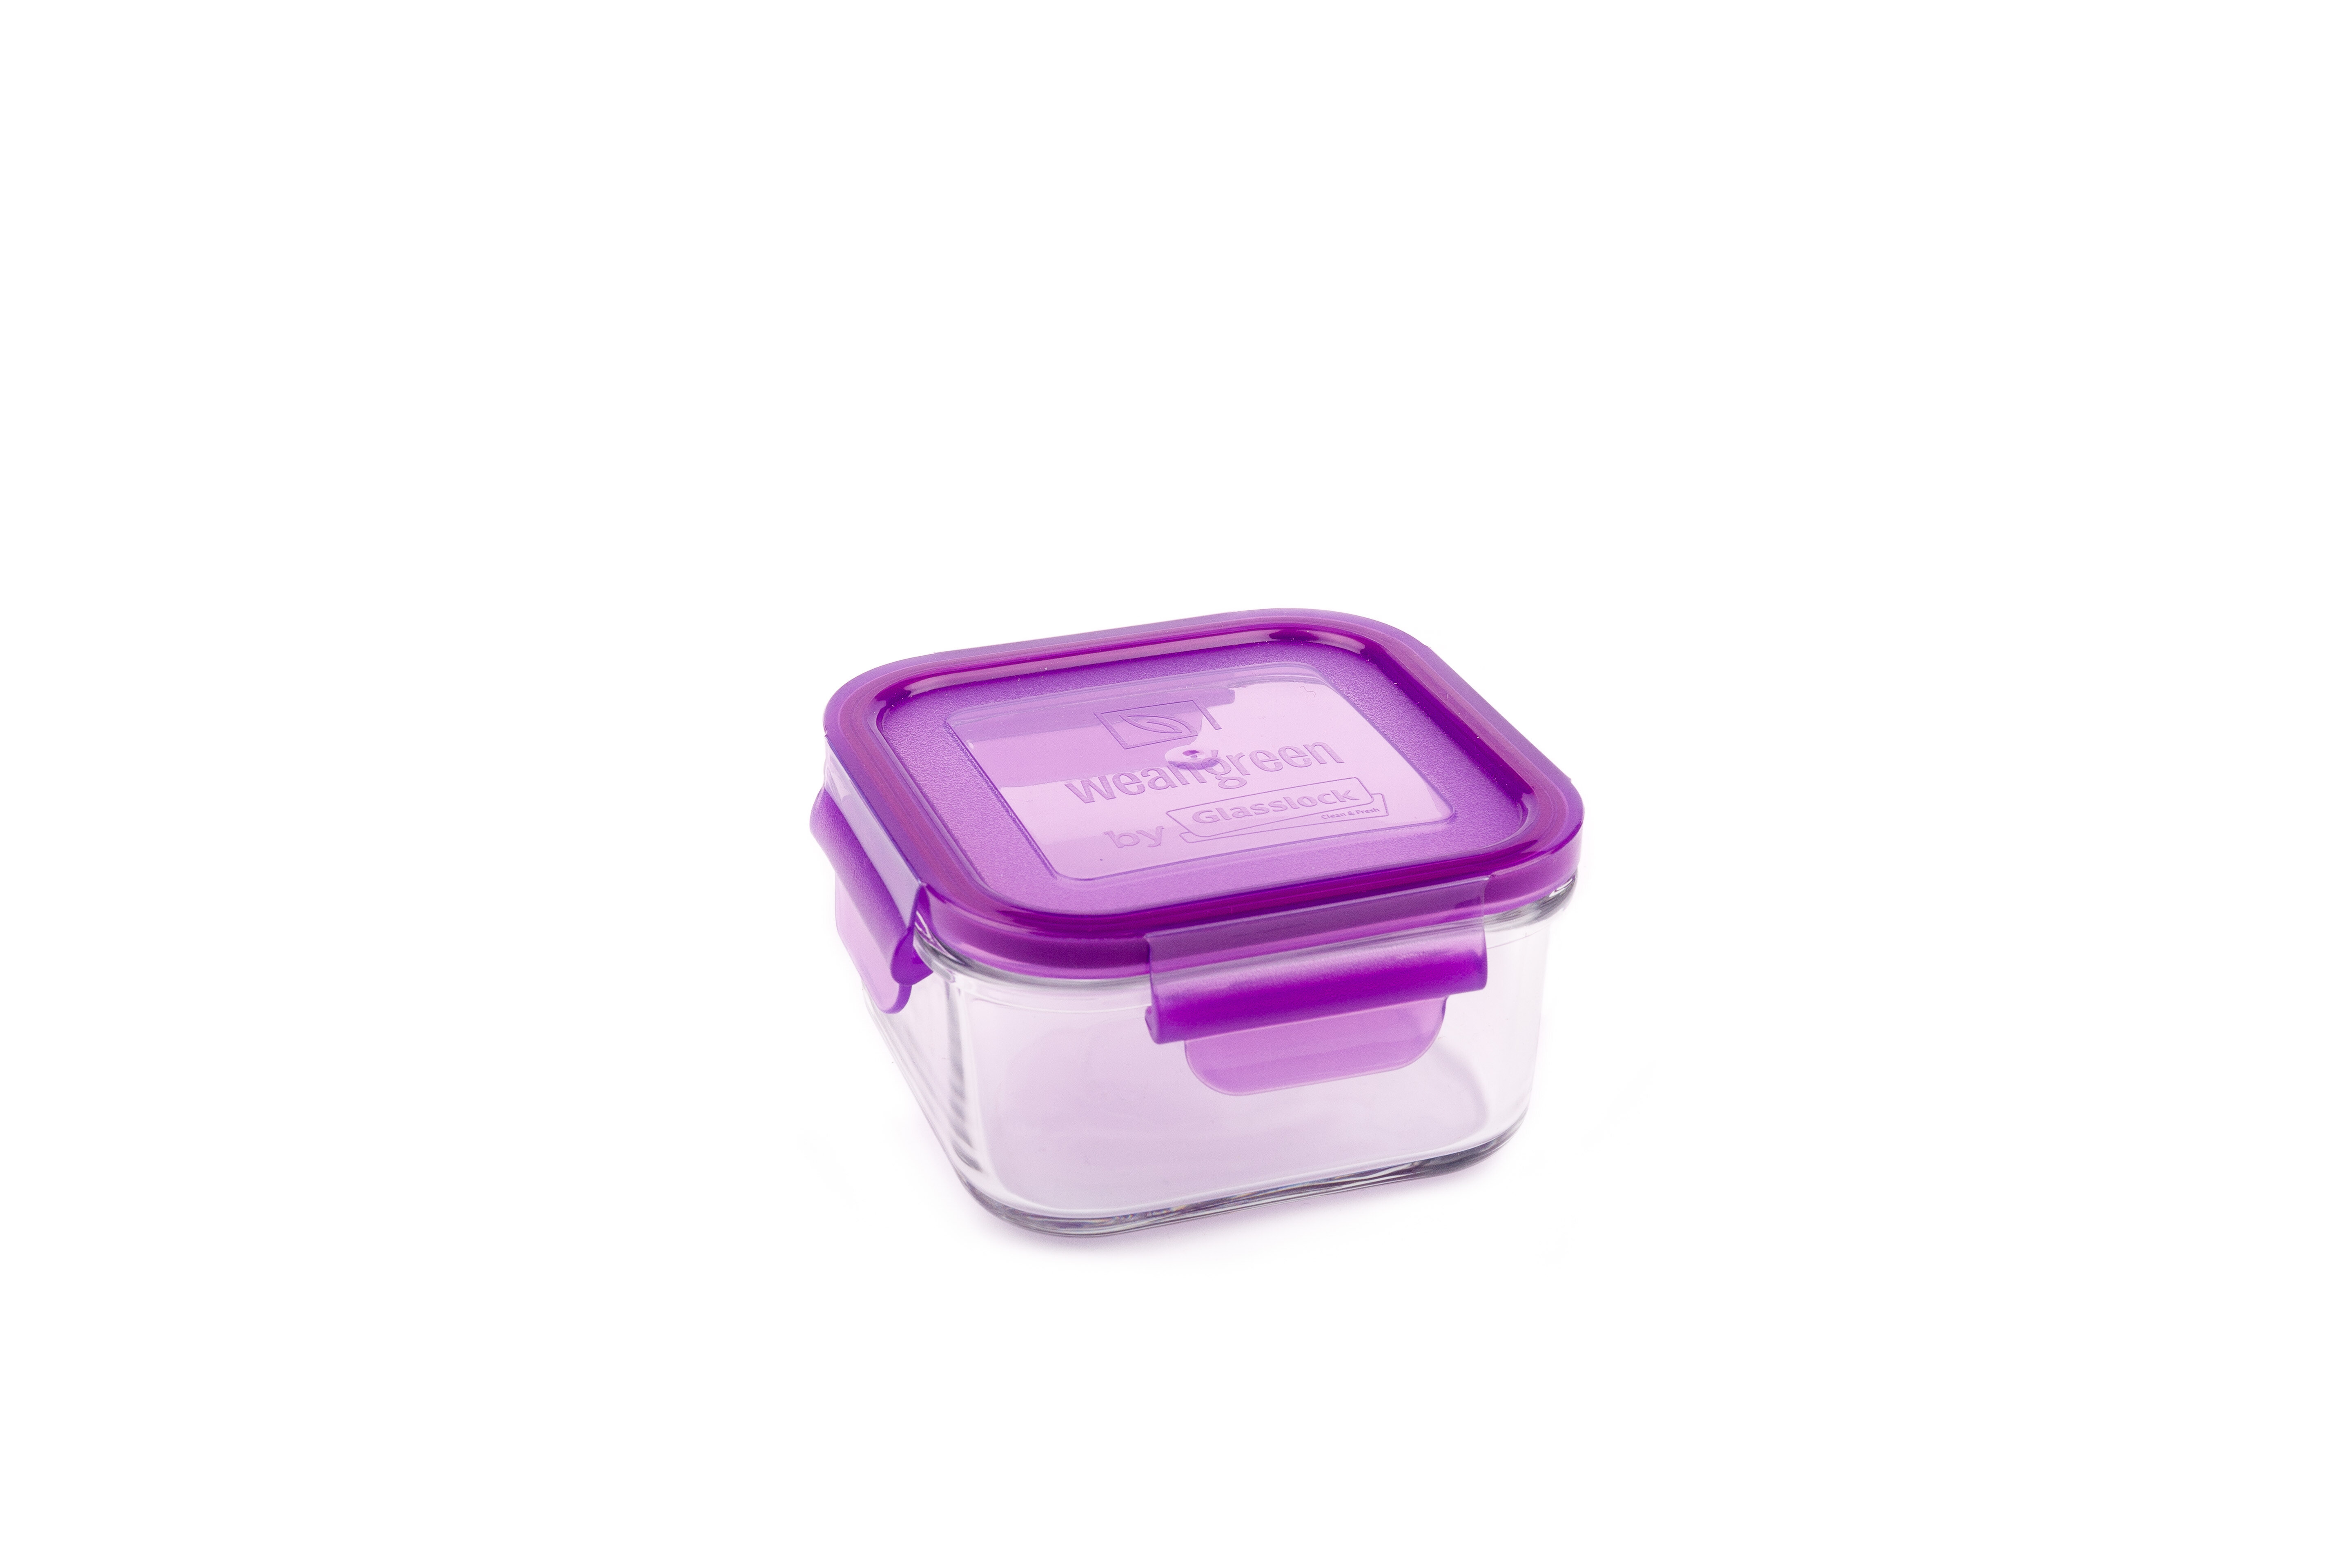 Tupperware Square Rounds 16 Ounce Freezer Containers Set 2 Lime Green  Freeze It